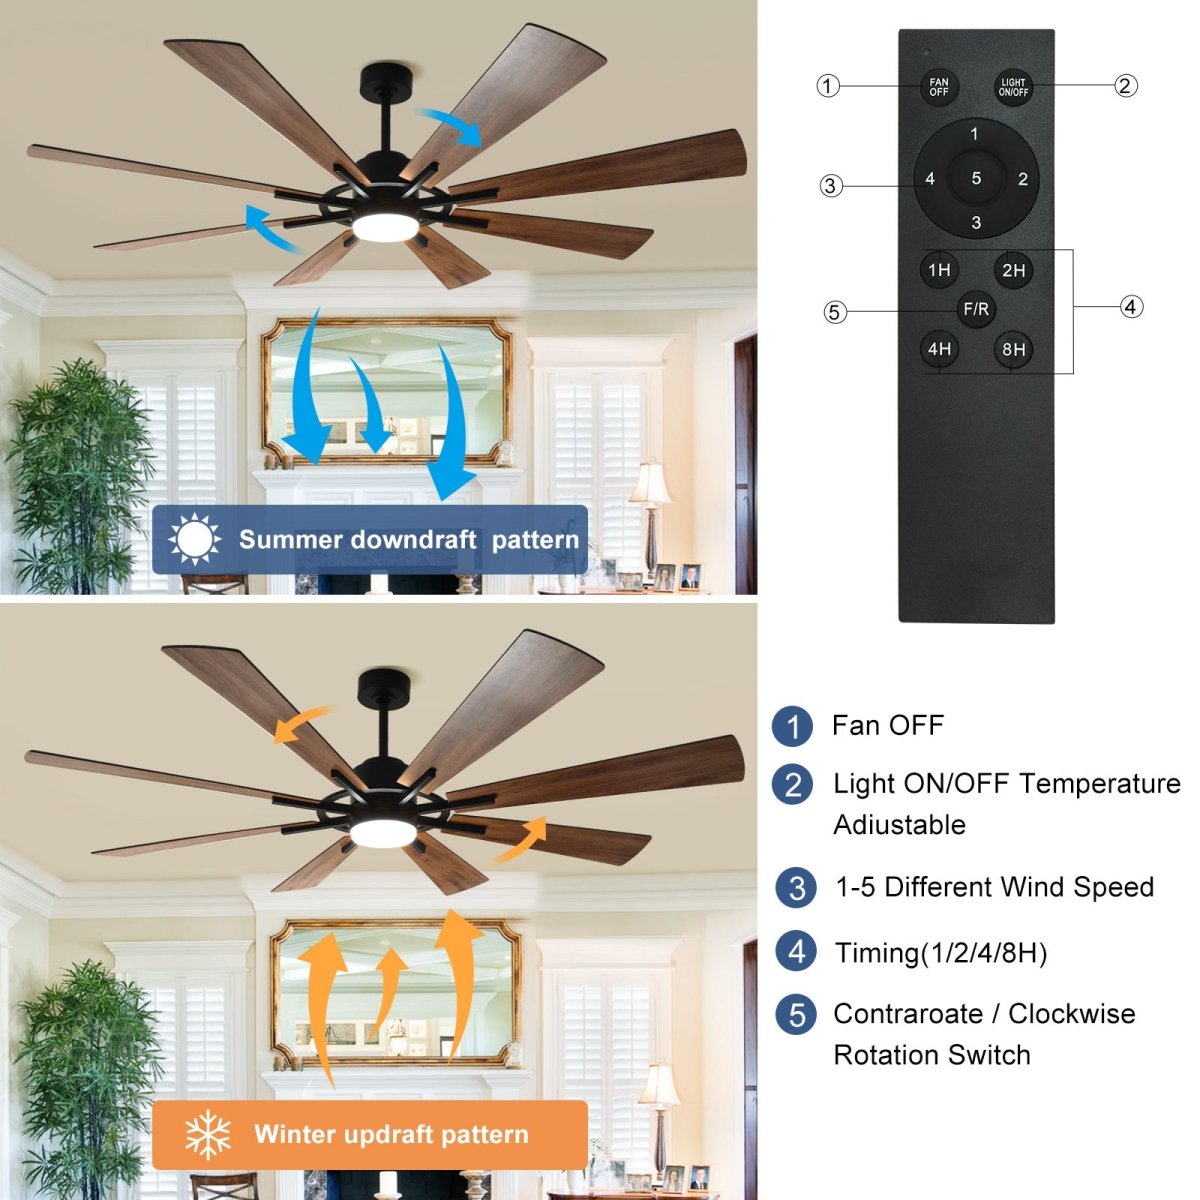 Depuley 72" DC Ceiling Fan with Lights Remote Control, Large Modern Black LED Ceiling Fans, 3-Color Reversible 8 Blades 5 Speed Quiet Motor for Living Room, Patio Hall, Office & Covered Outdoor, Timer - WS-FPZ45-18C-BR 3 | DEPULEY